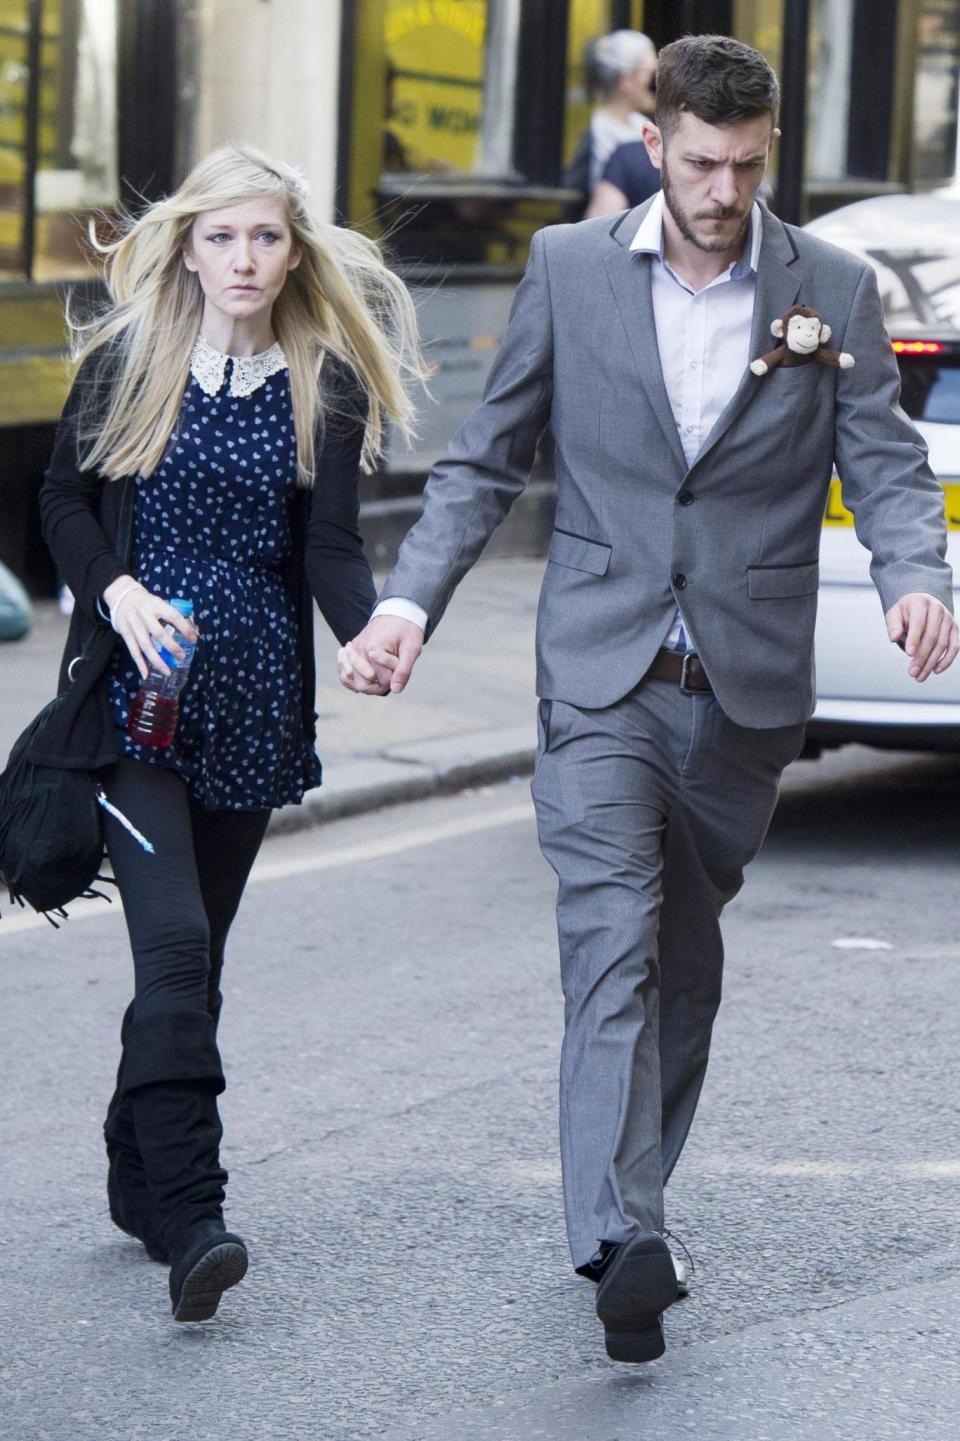 Chris Gard and Connie Yates, the parents of nine-month-old Charlie Gard (PA)